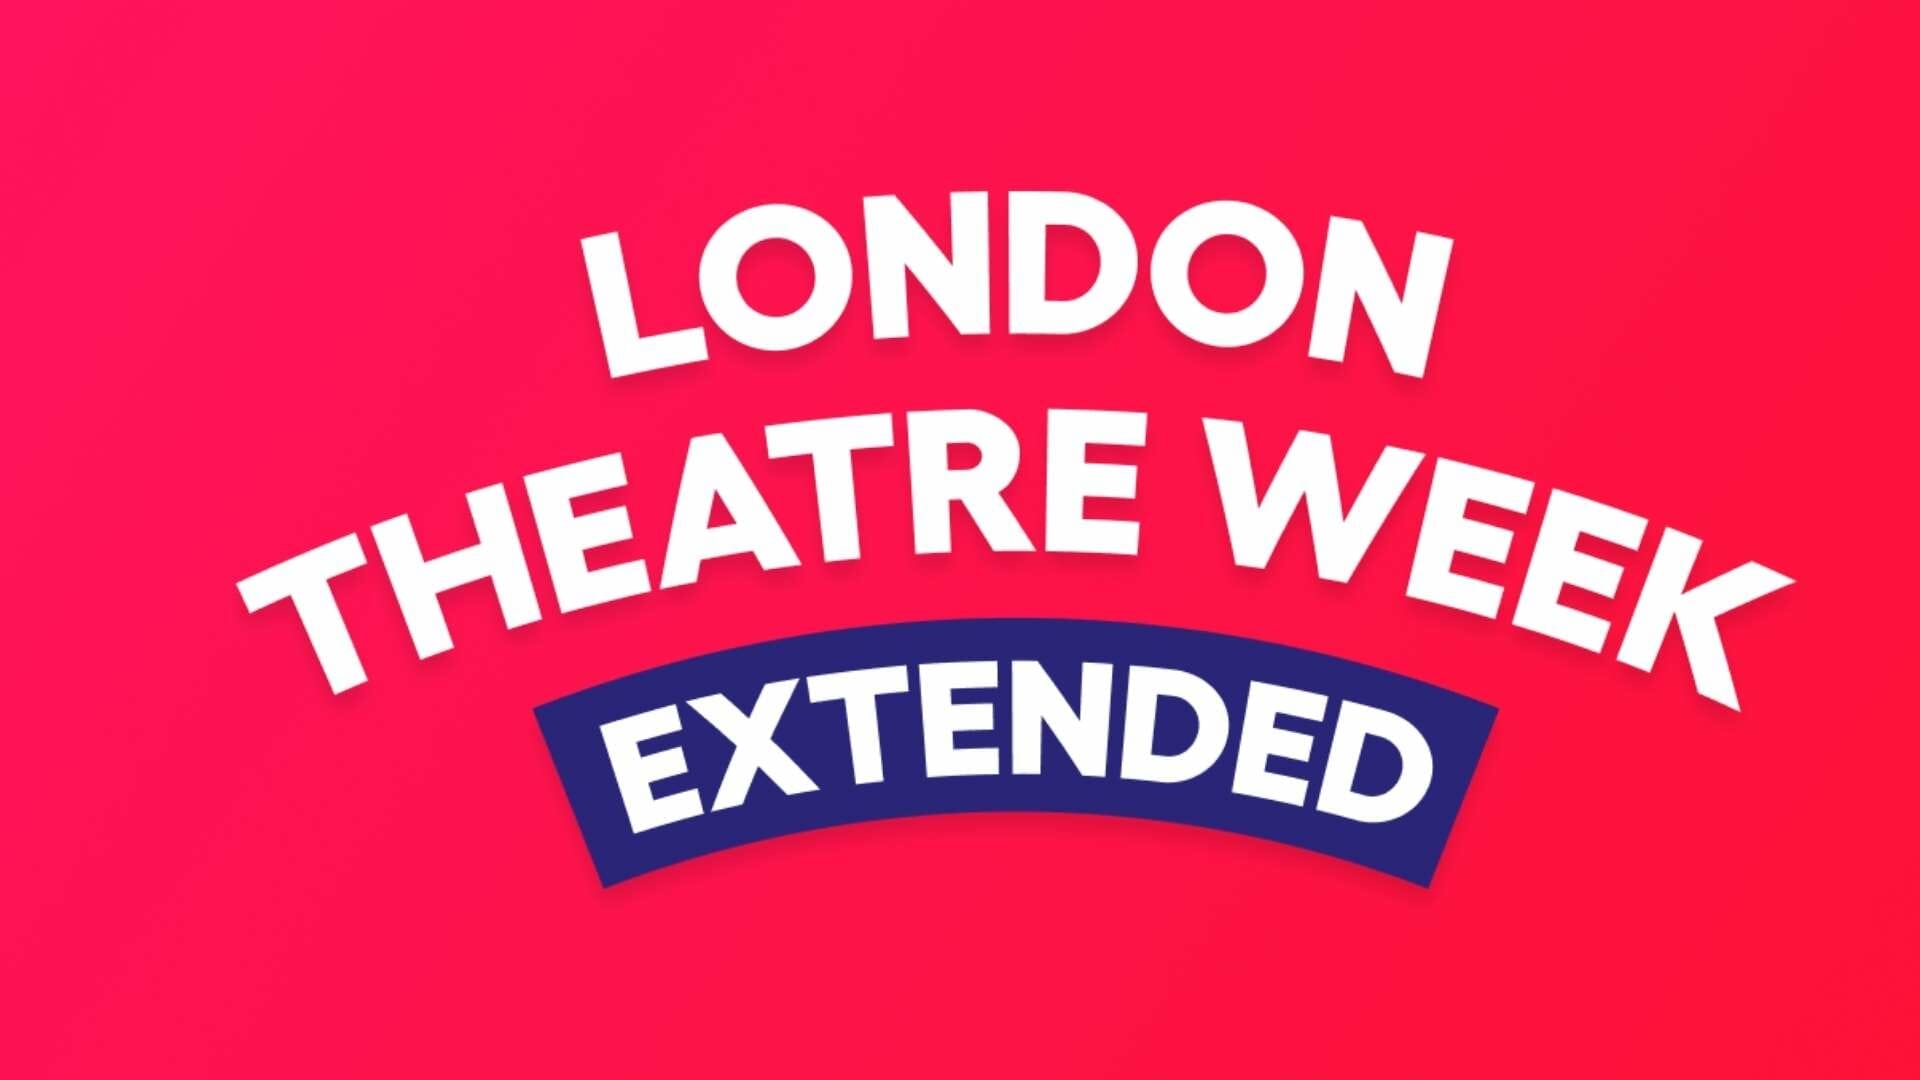 Biggest London Theatre Week Extends For a Third Week Theatre Weekly